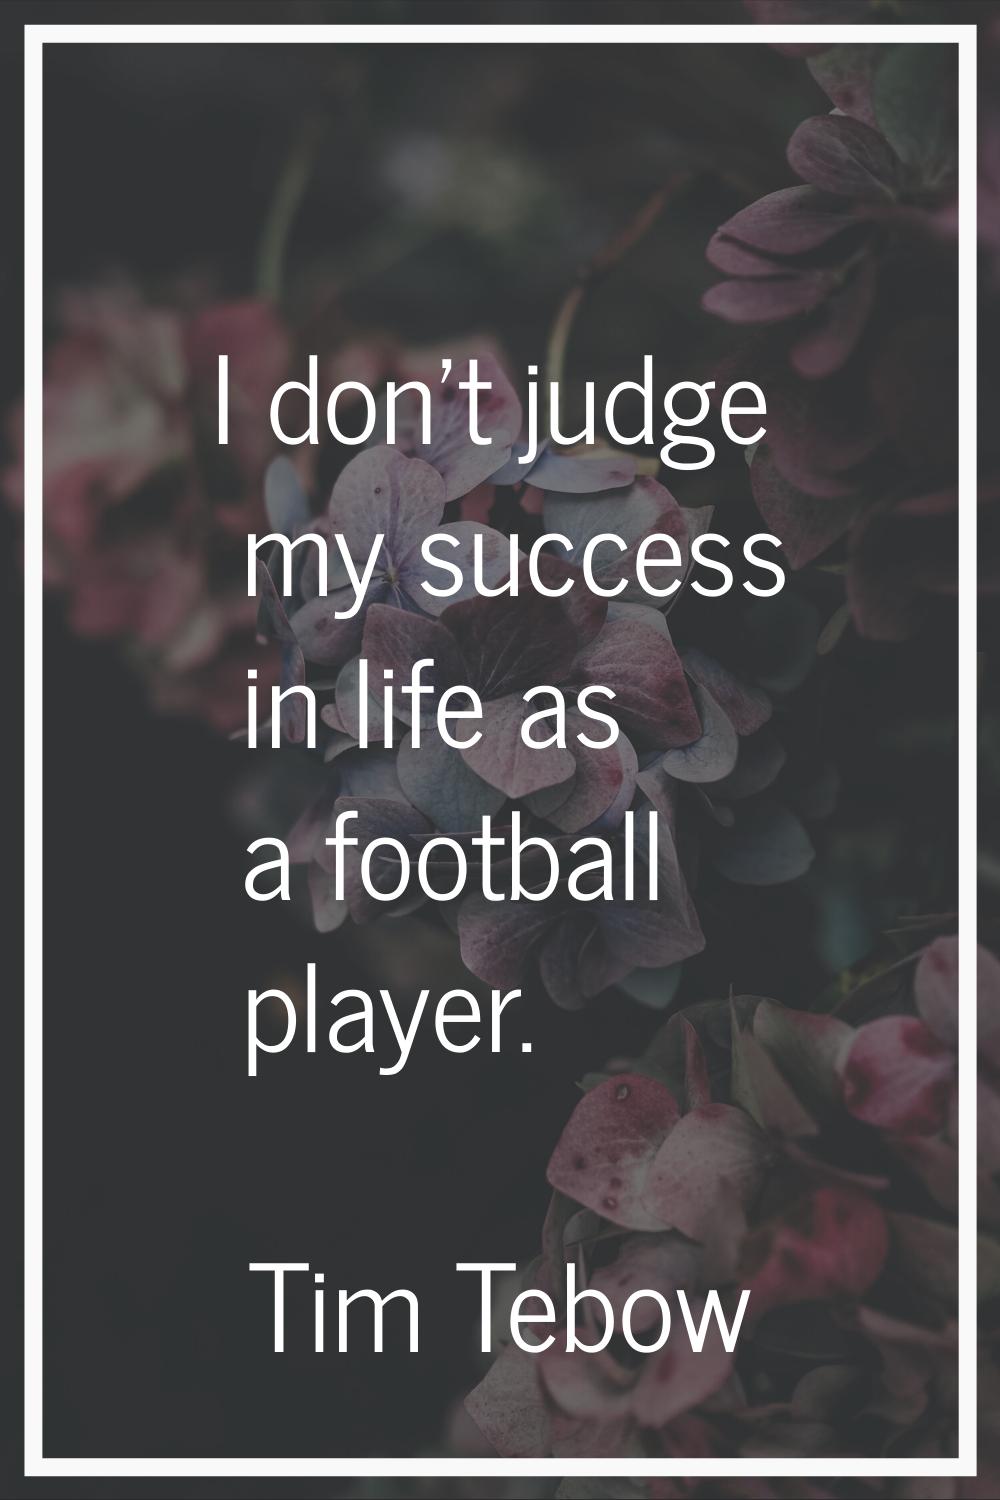 I don't judge my success in life as a football player.